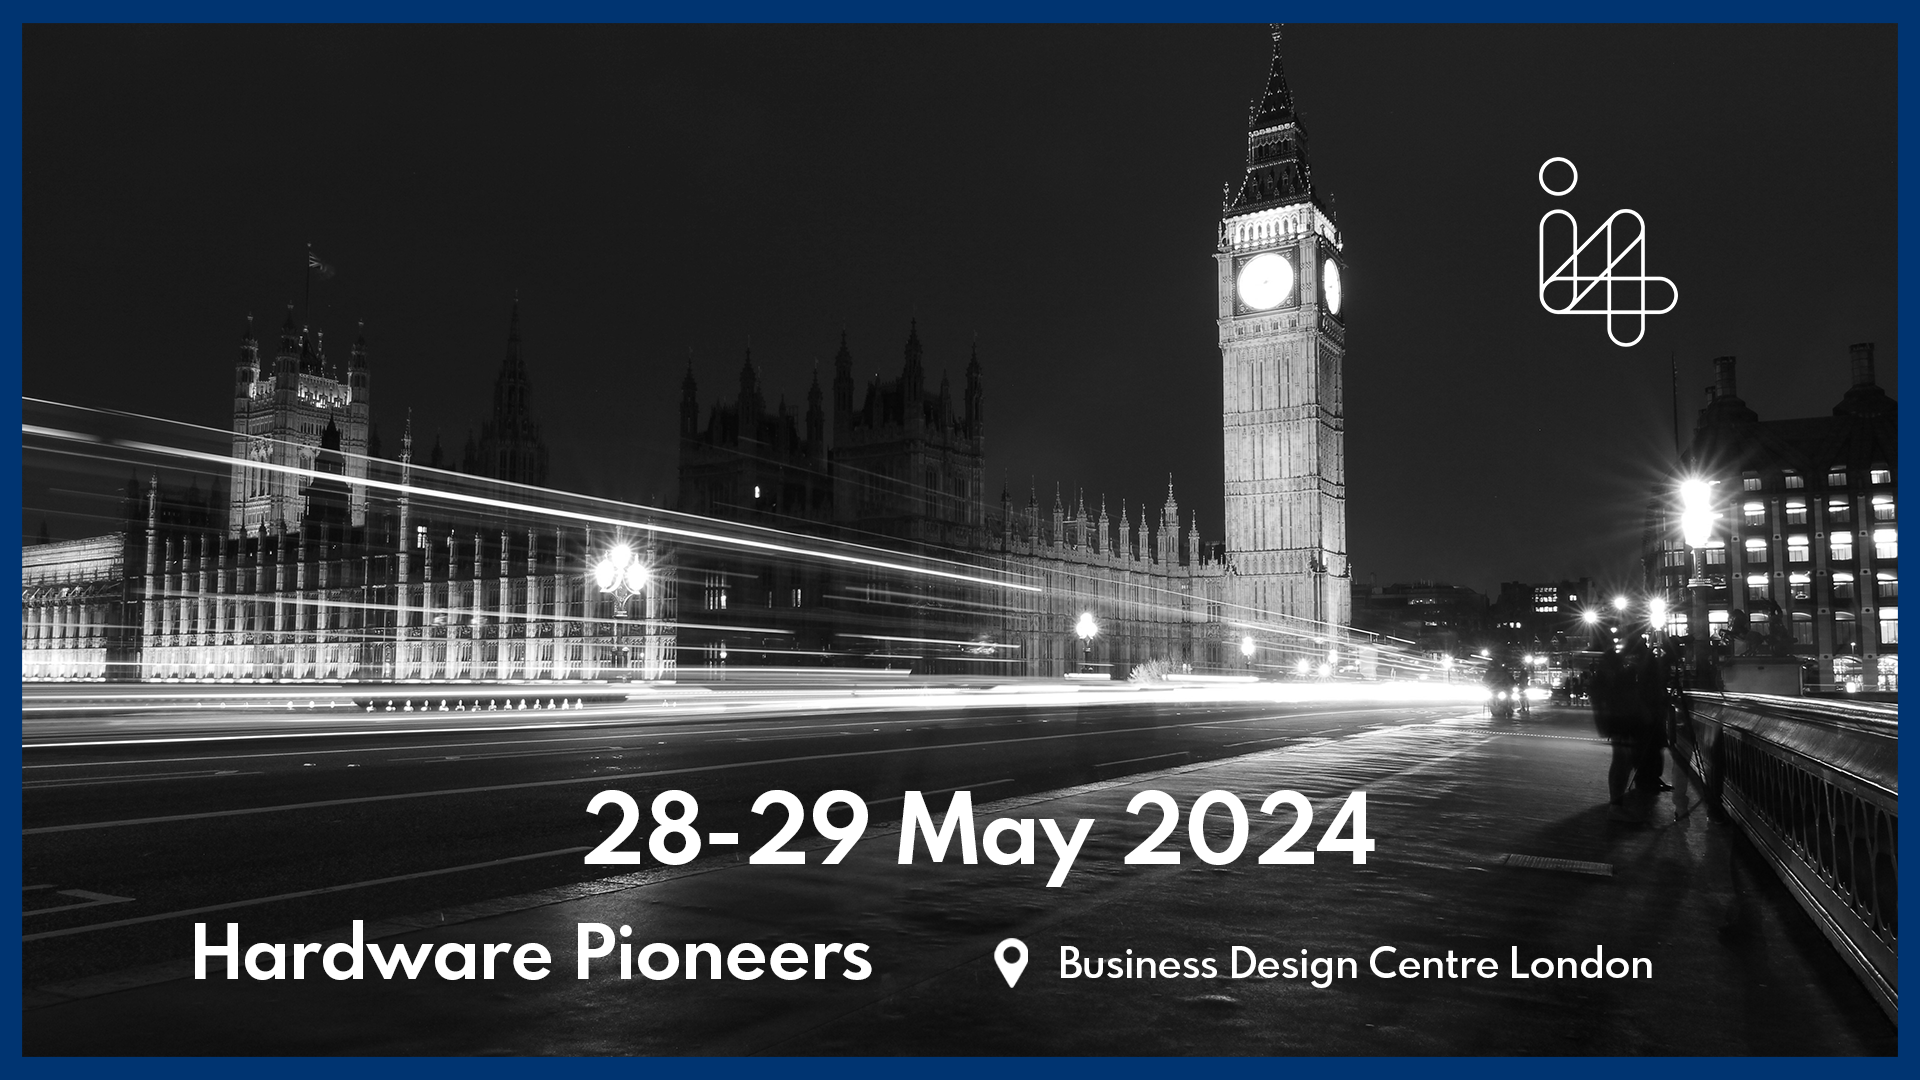 Big ben in the background. Text over the image - Business Design Centre London on the 28 and 29 of May